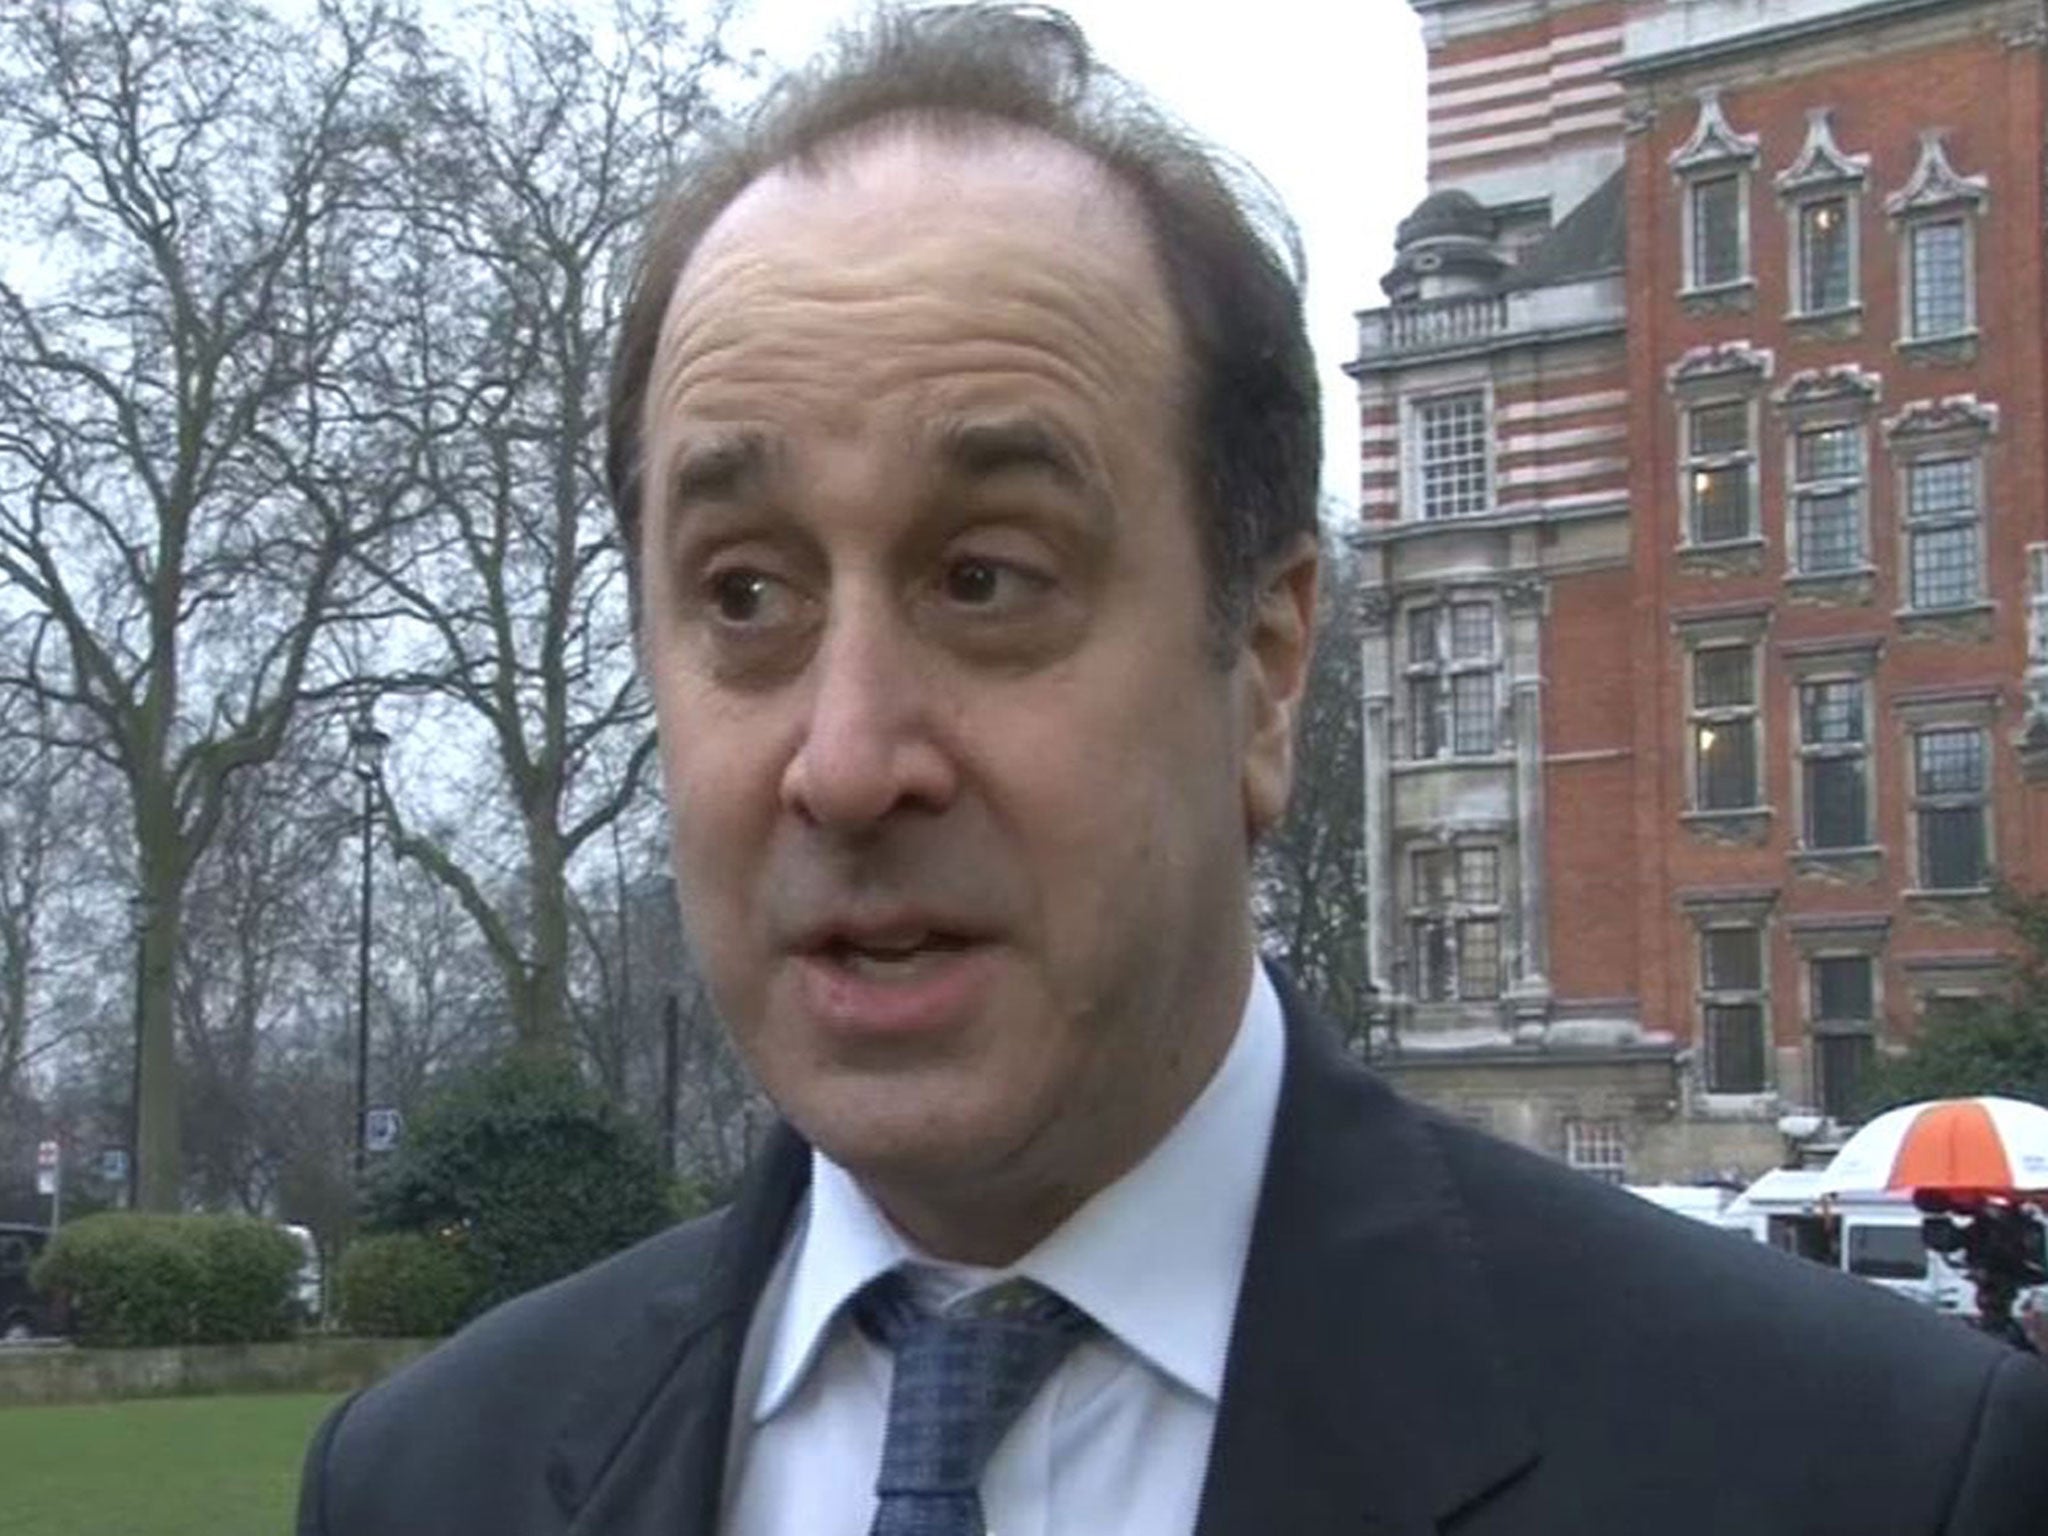 Brooks Newmark said he has been 'battling demons - and lost'